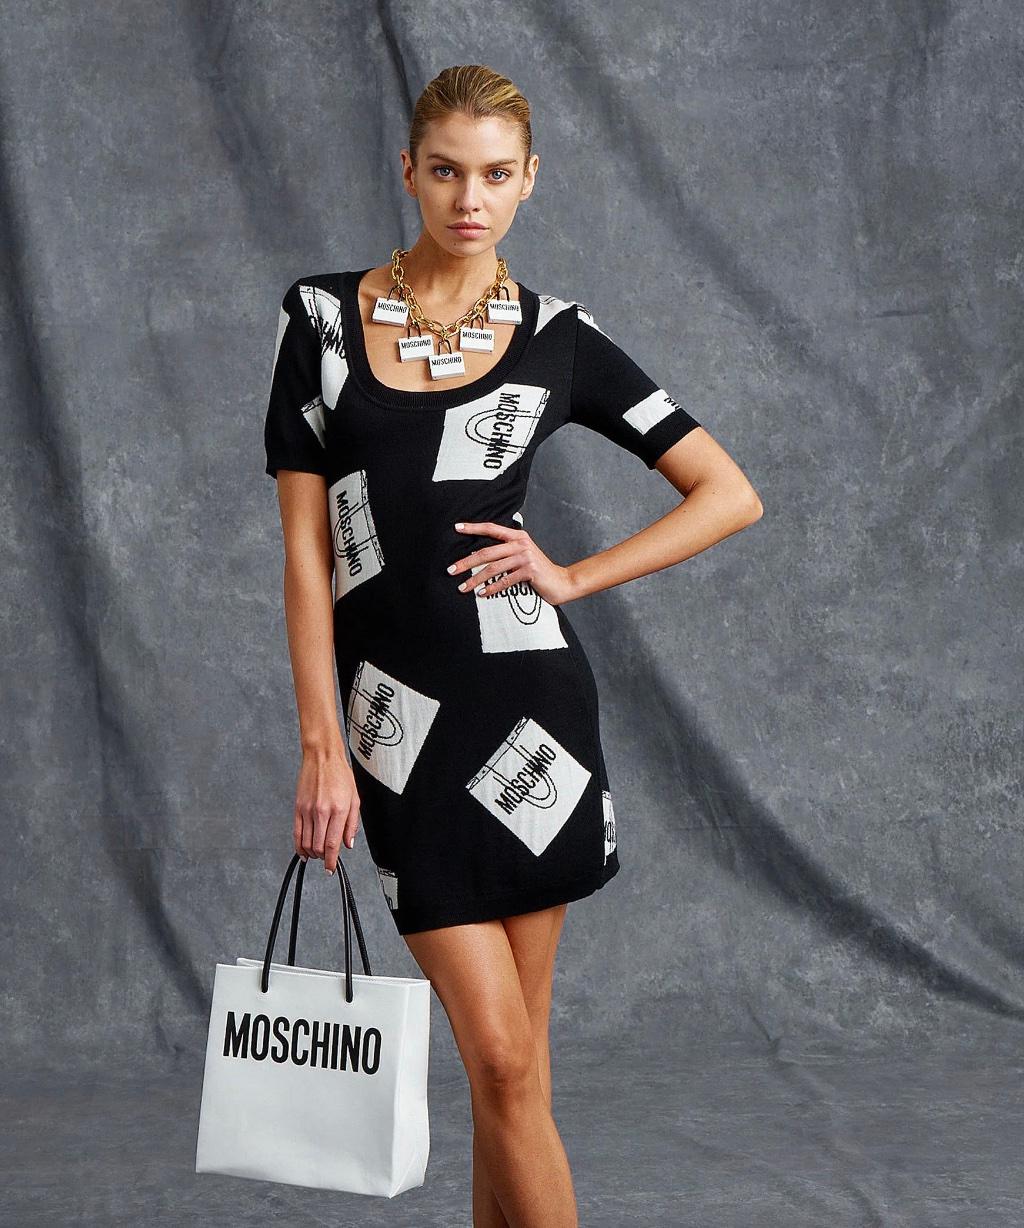 MOSCHINO Shopping Bag Charm Novelty Necklace Resort 2016 Runway For Sale 6